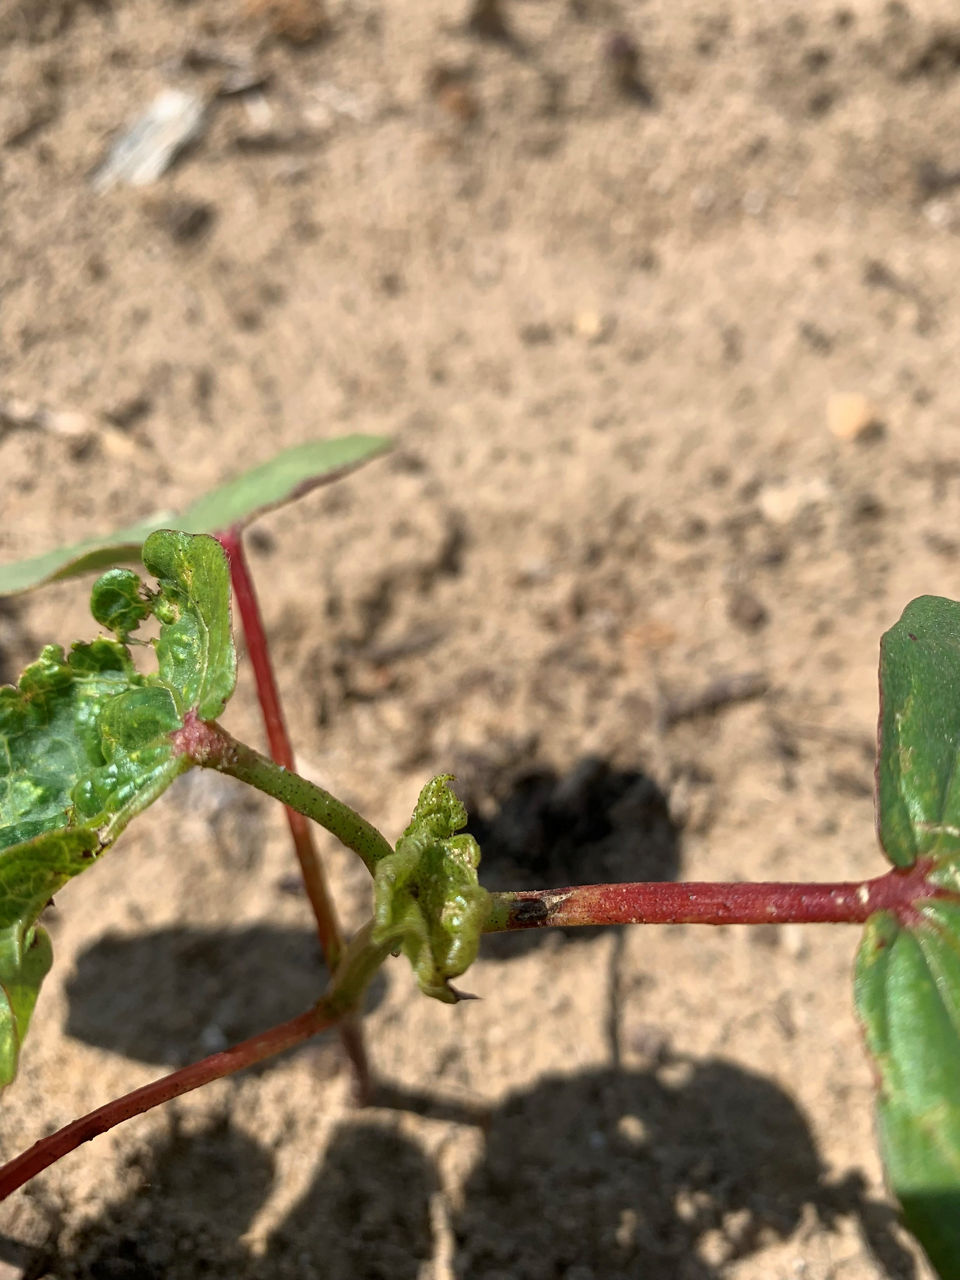 Thrips injury in cotton.